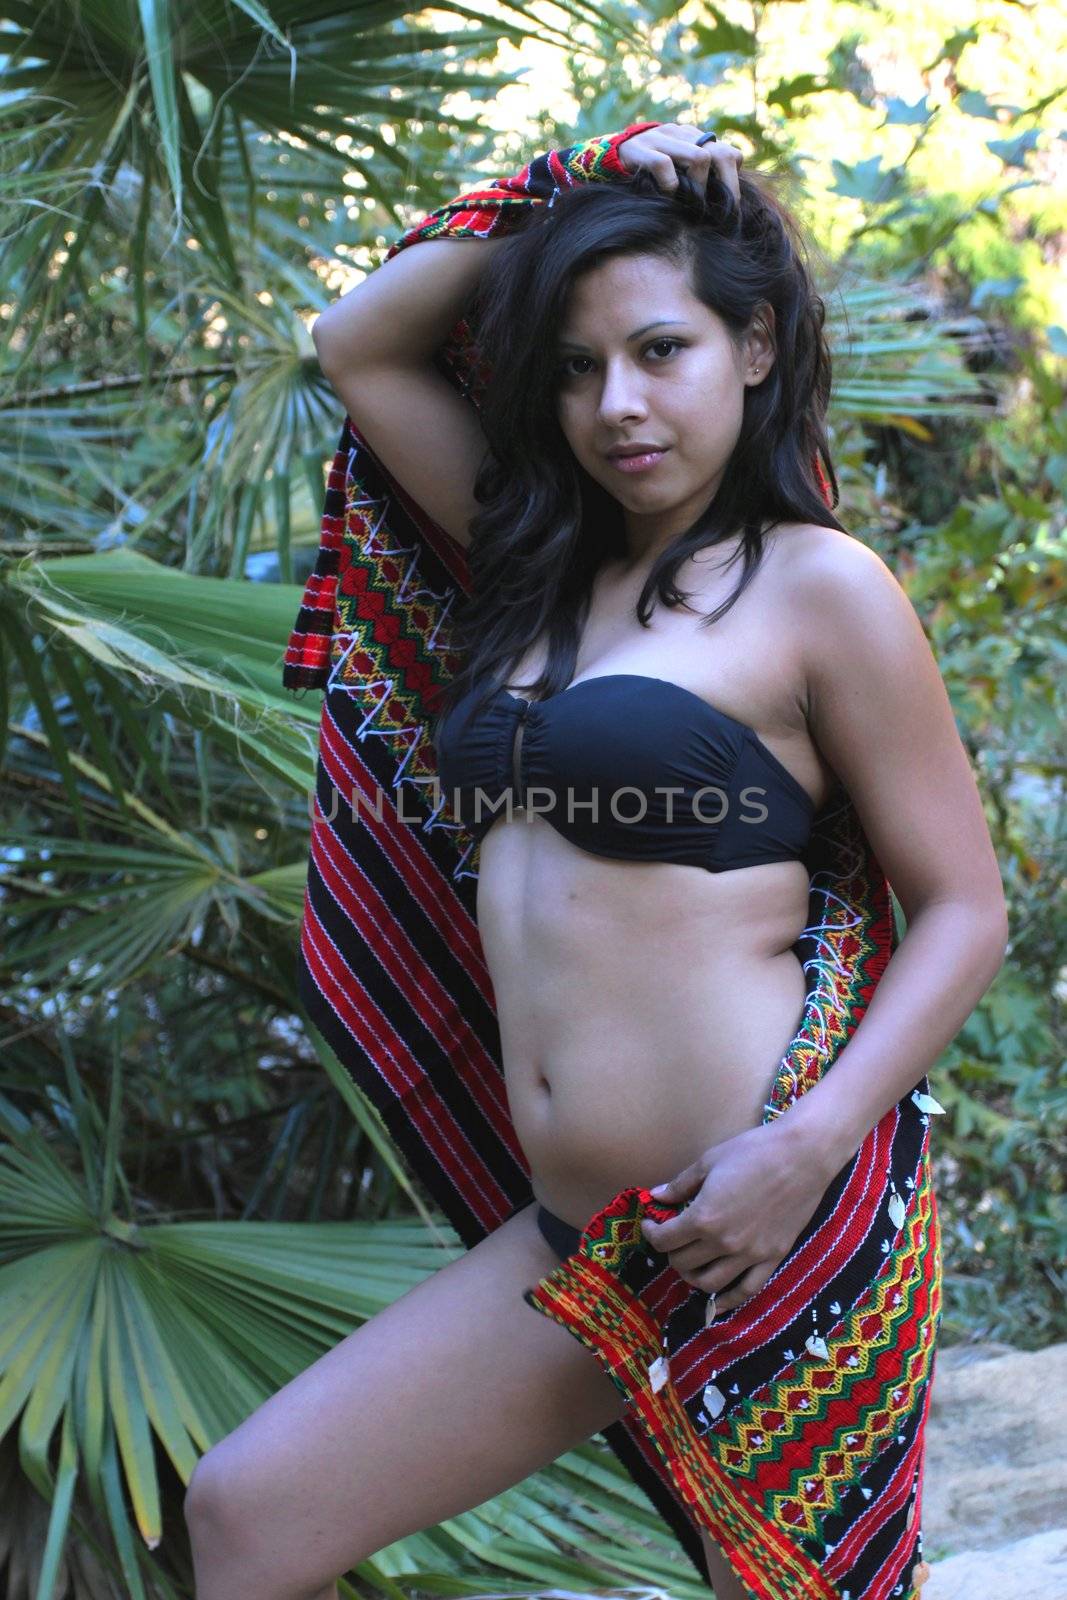 Model shot of a Hispanic beauty in front of a palm tree.